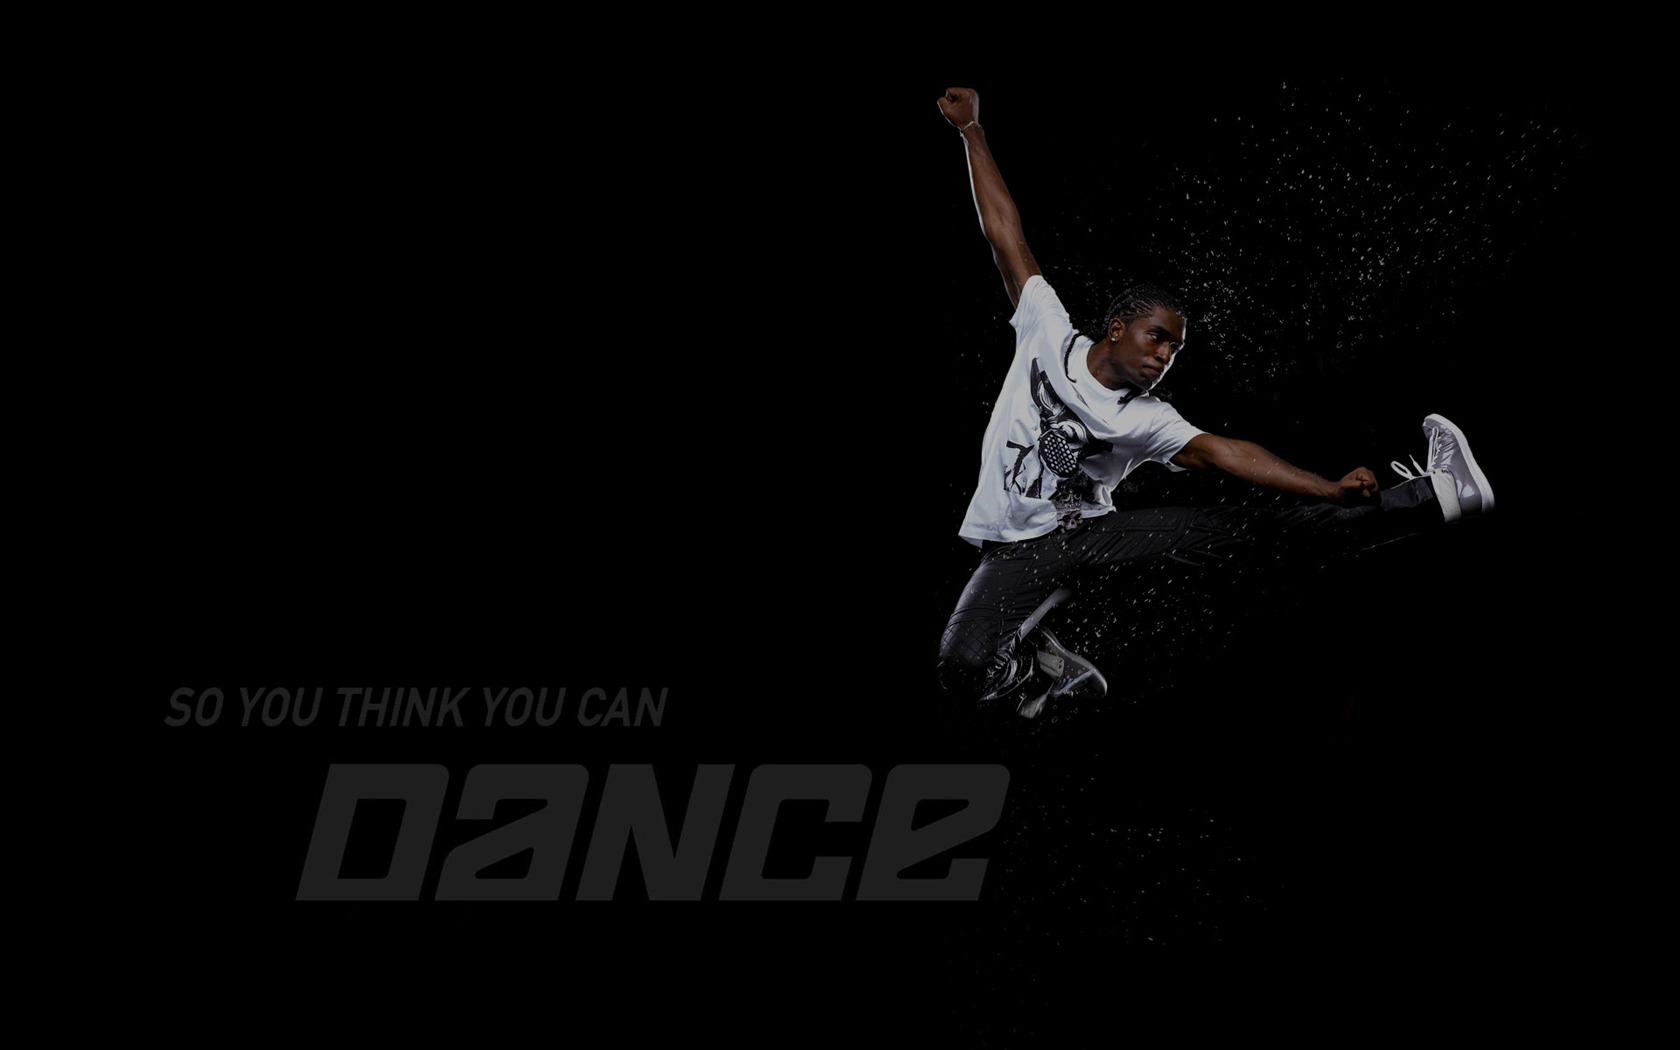 So You Think You Can Dance 舞林爭霸壁紙(二) #4 - 1680x1050